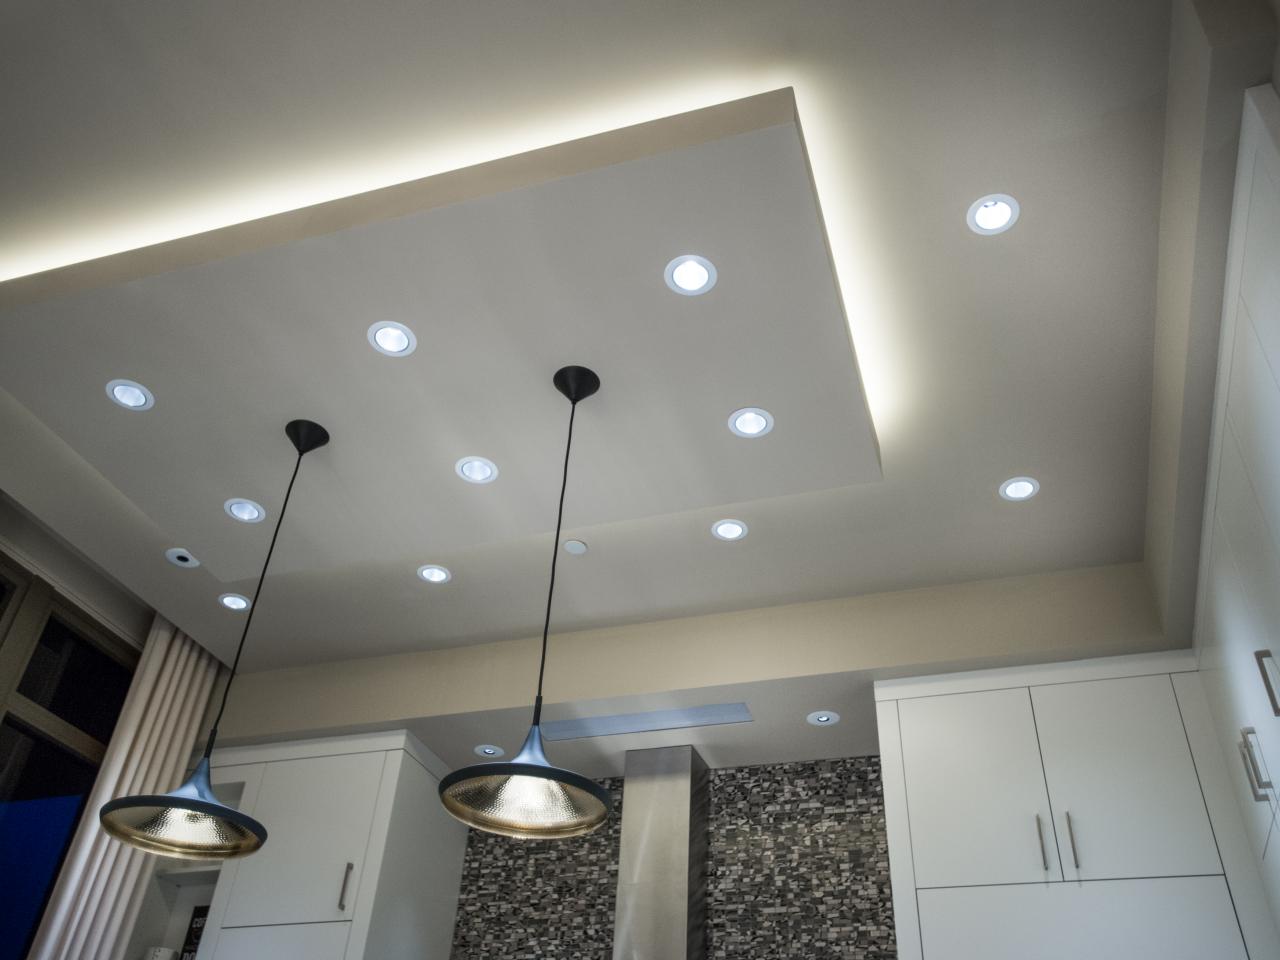 What is new construction recessed lighting?